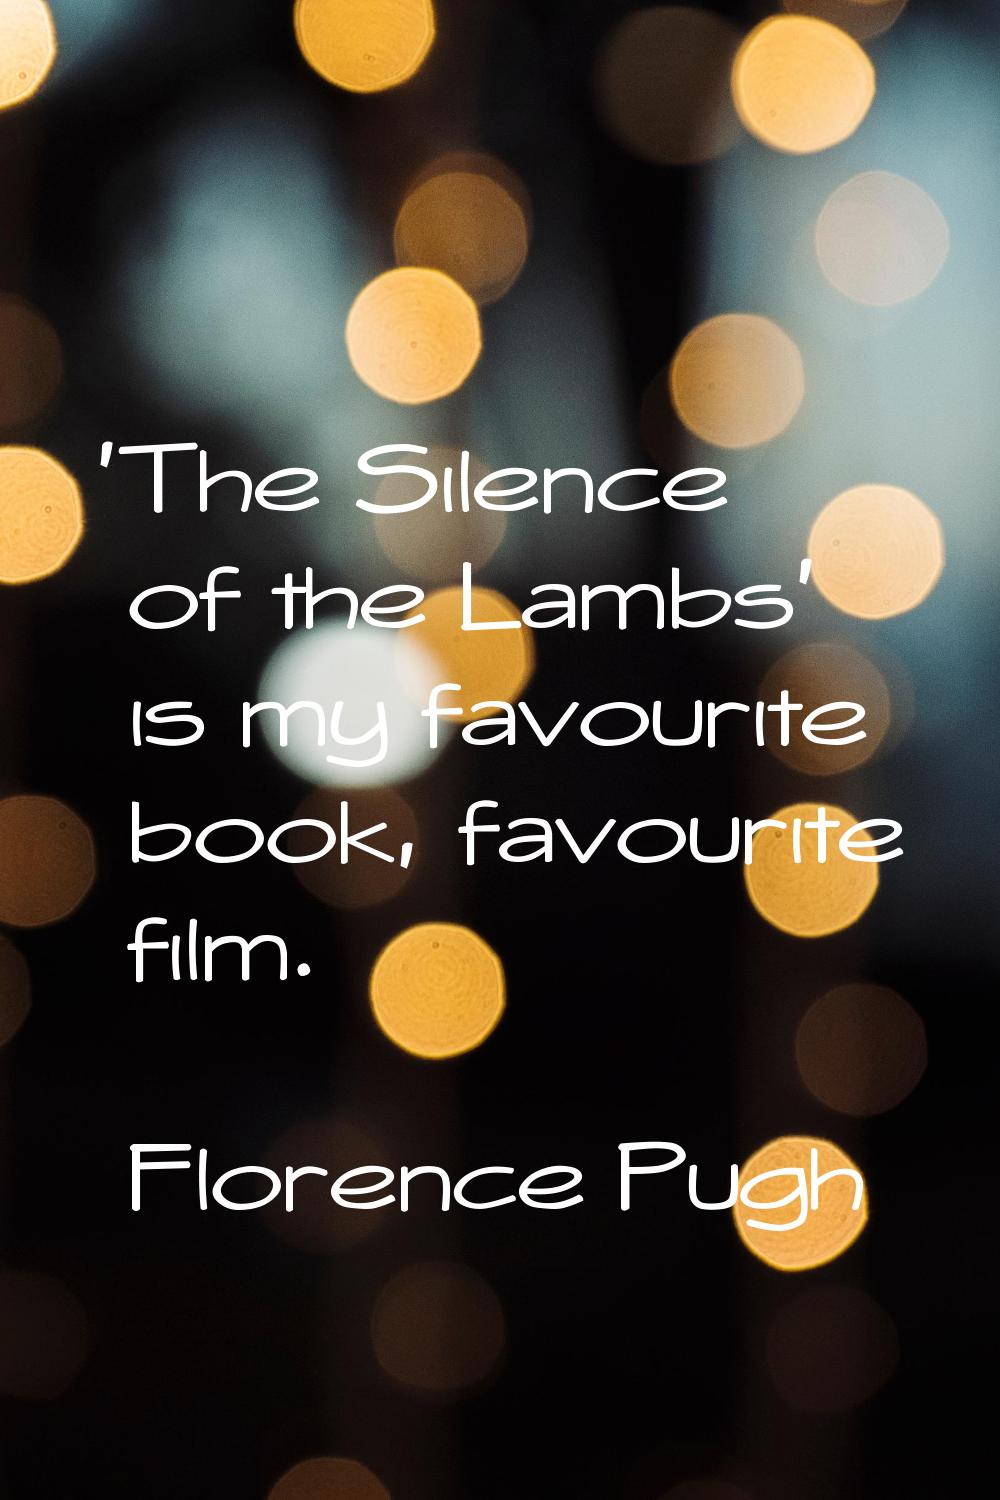 'The Silence of the Lambs' is my favourite book, favourite film.